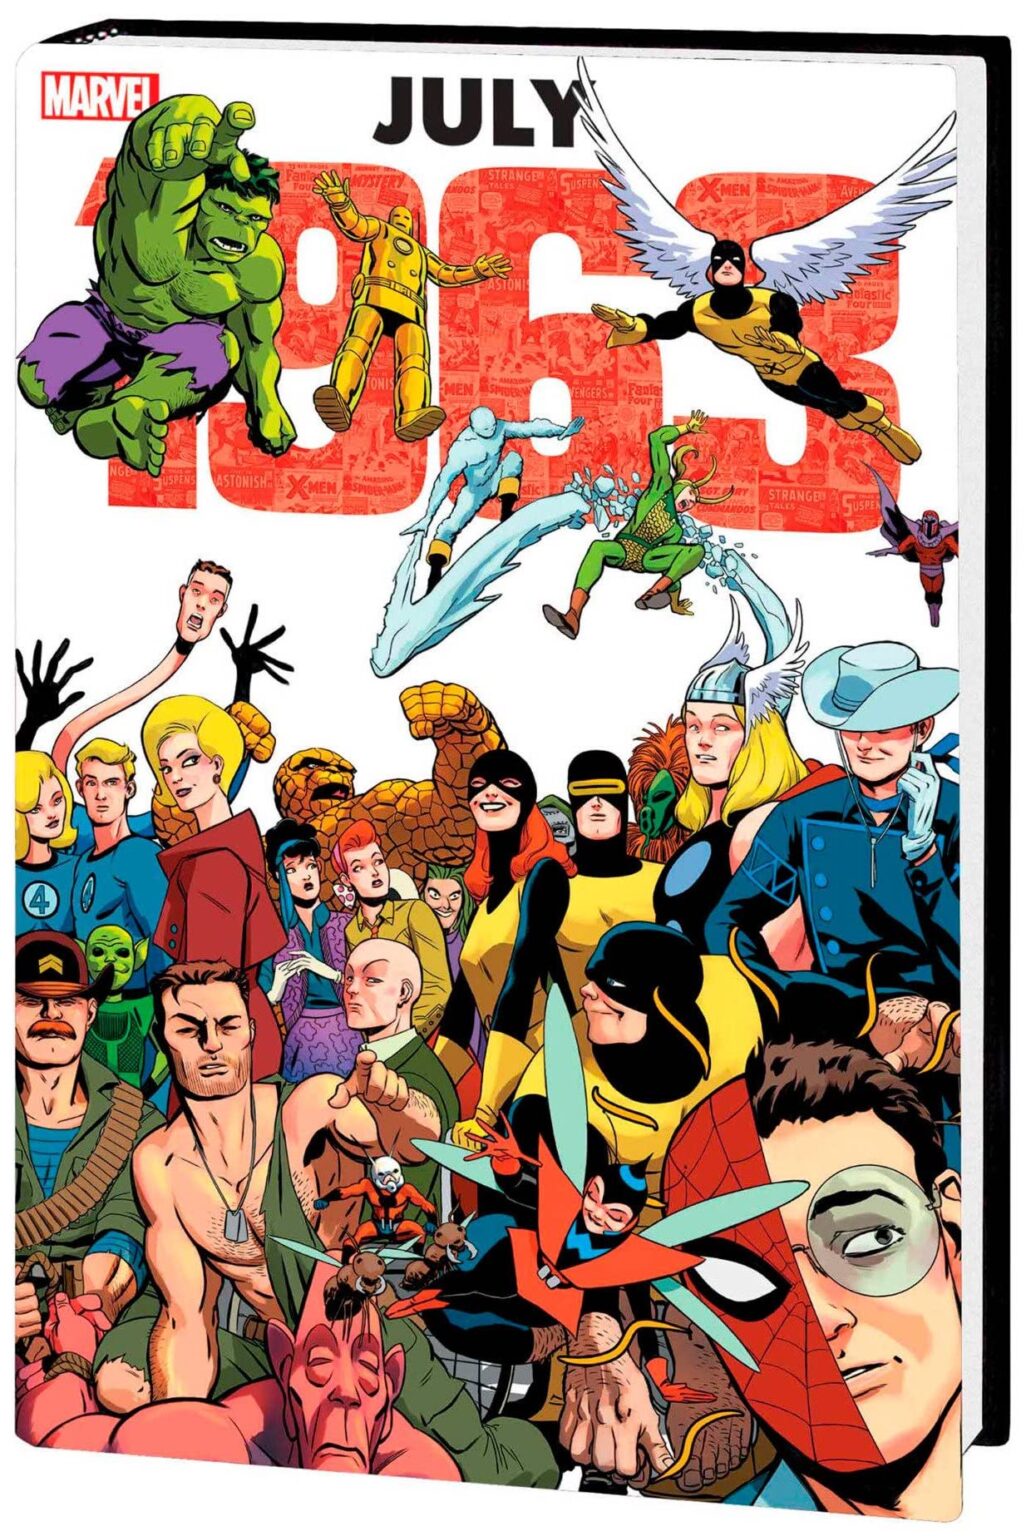 MARVEL to Release JULY 1963 OMNIBUS to Mark AVENGERS, XMEN Debuts